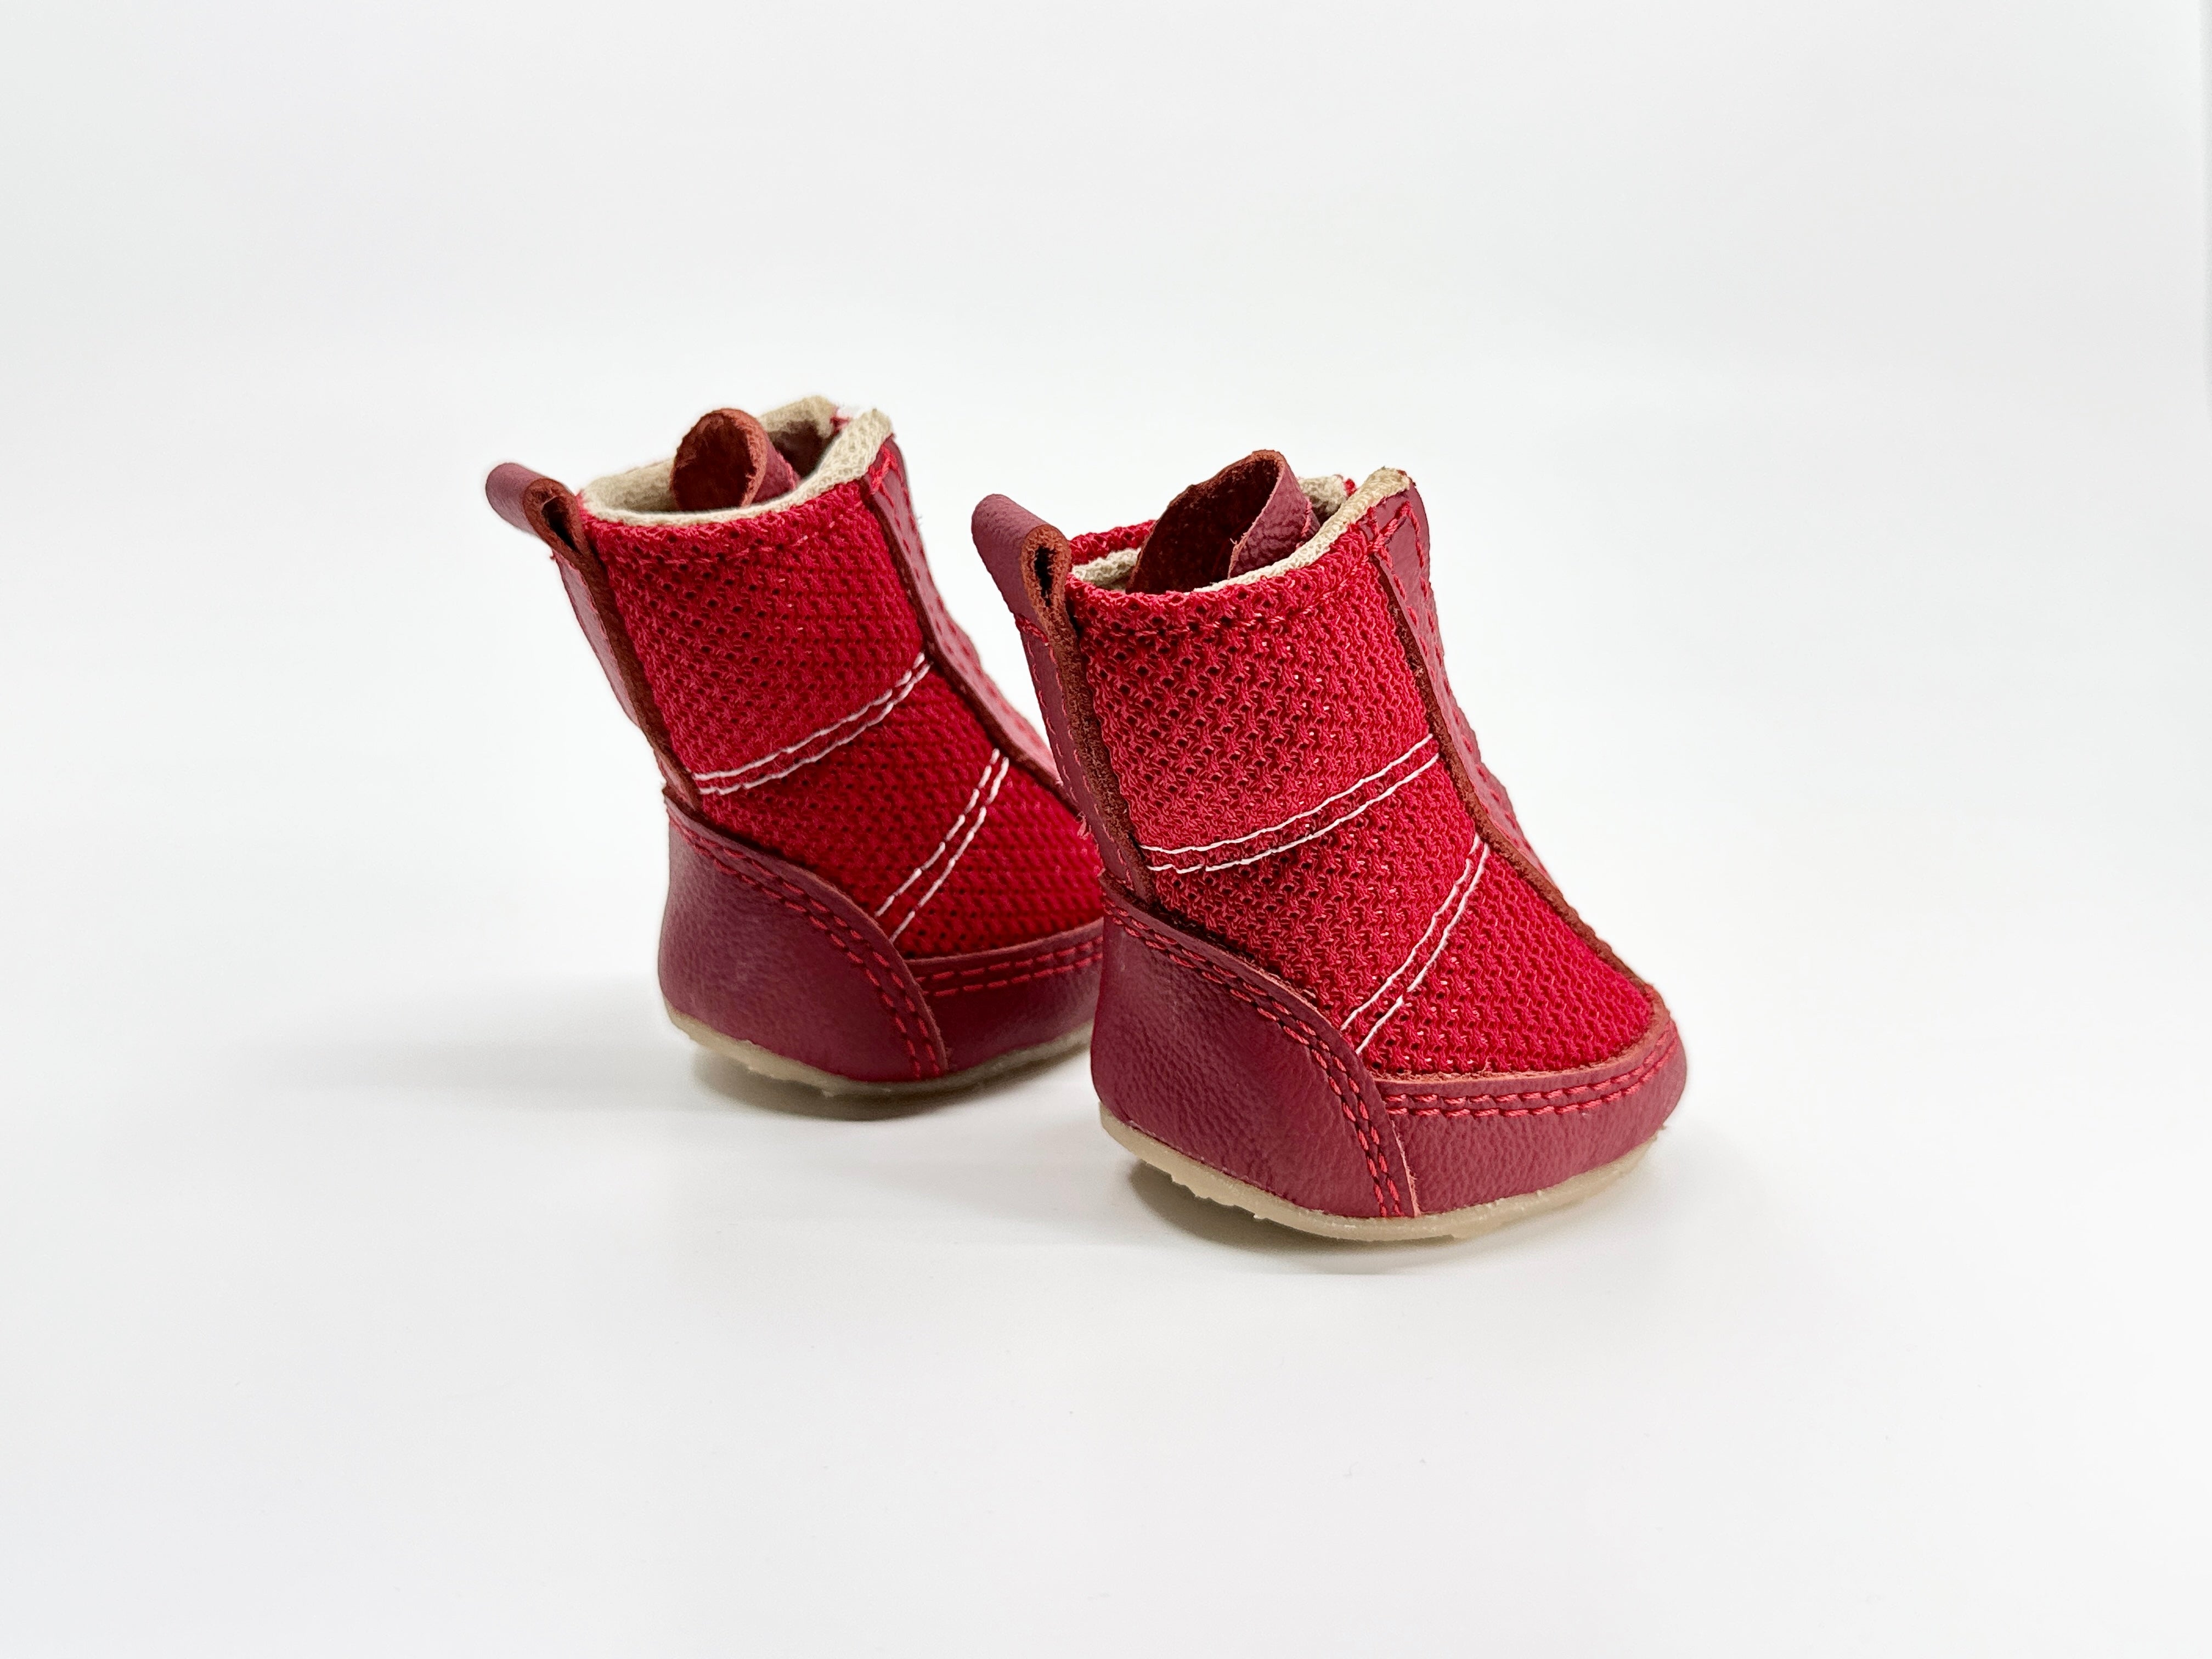 LEON Fiery Red Dog Boots